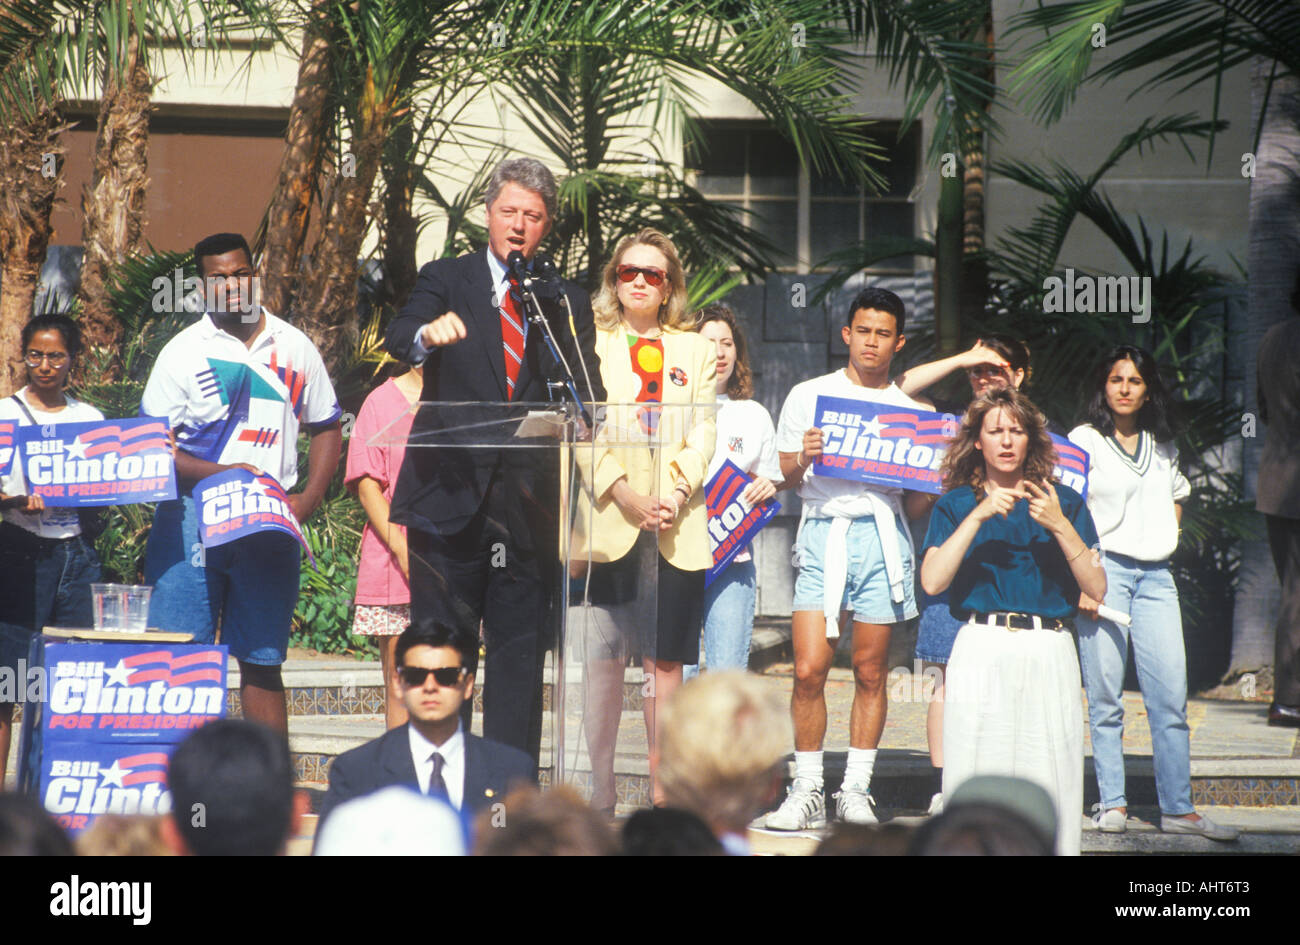 Governor Bill Clinton speaks at a UCLA rally in 1992 in Los Angeles California Stock Photo